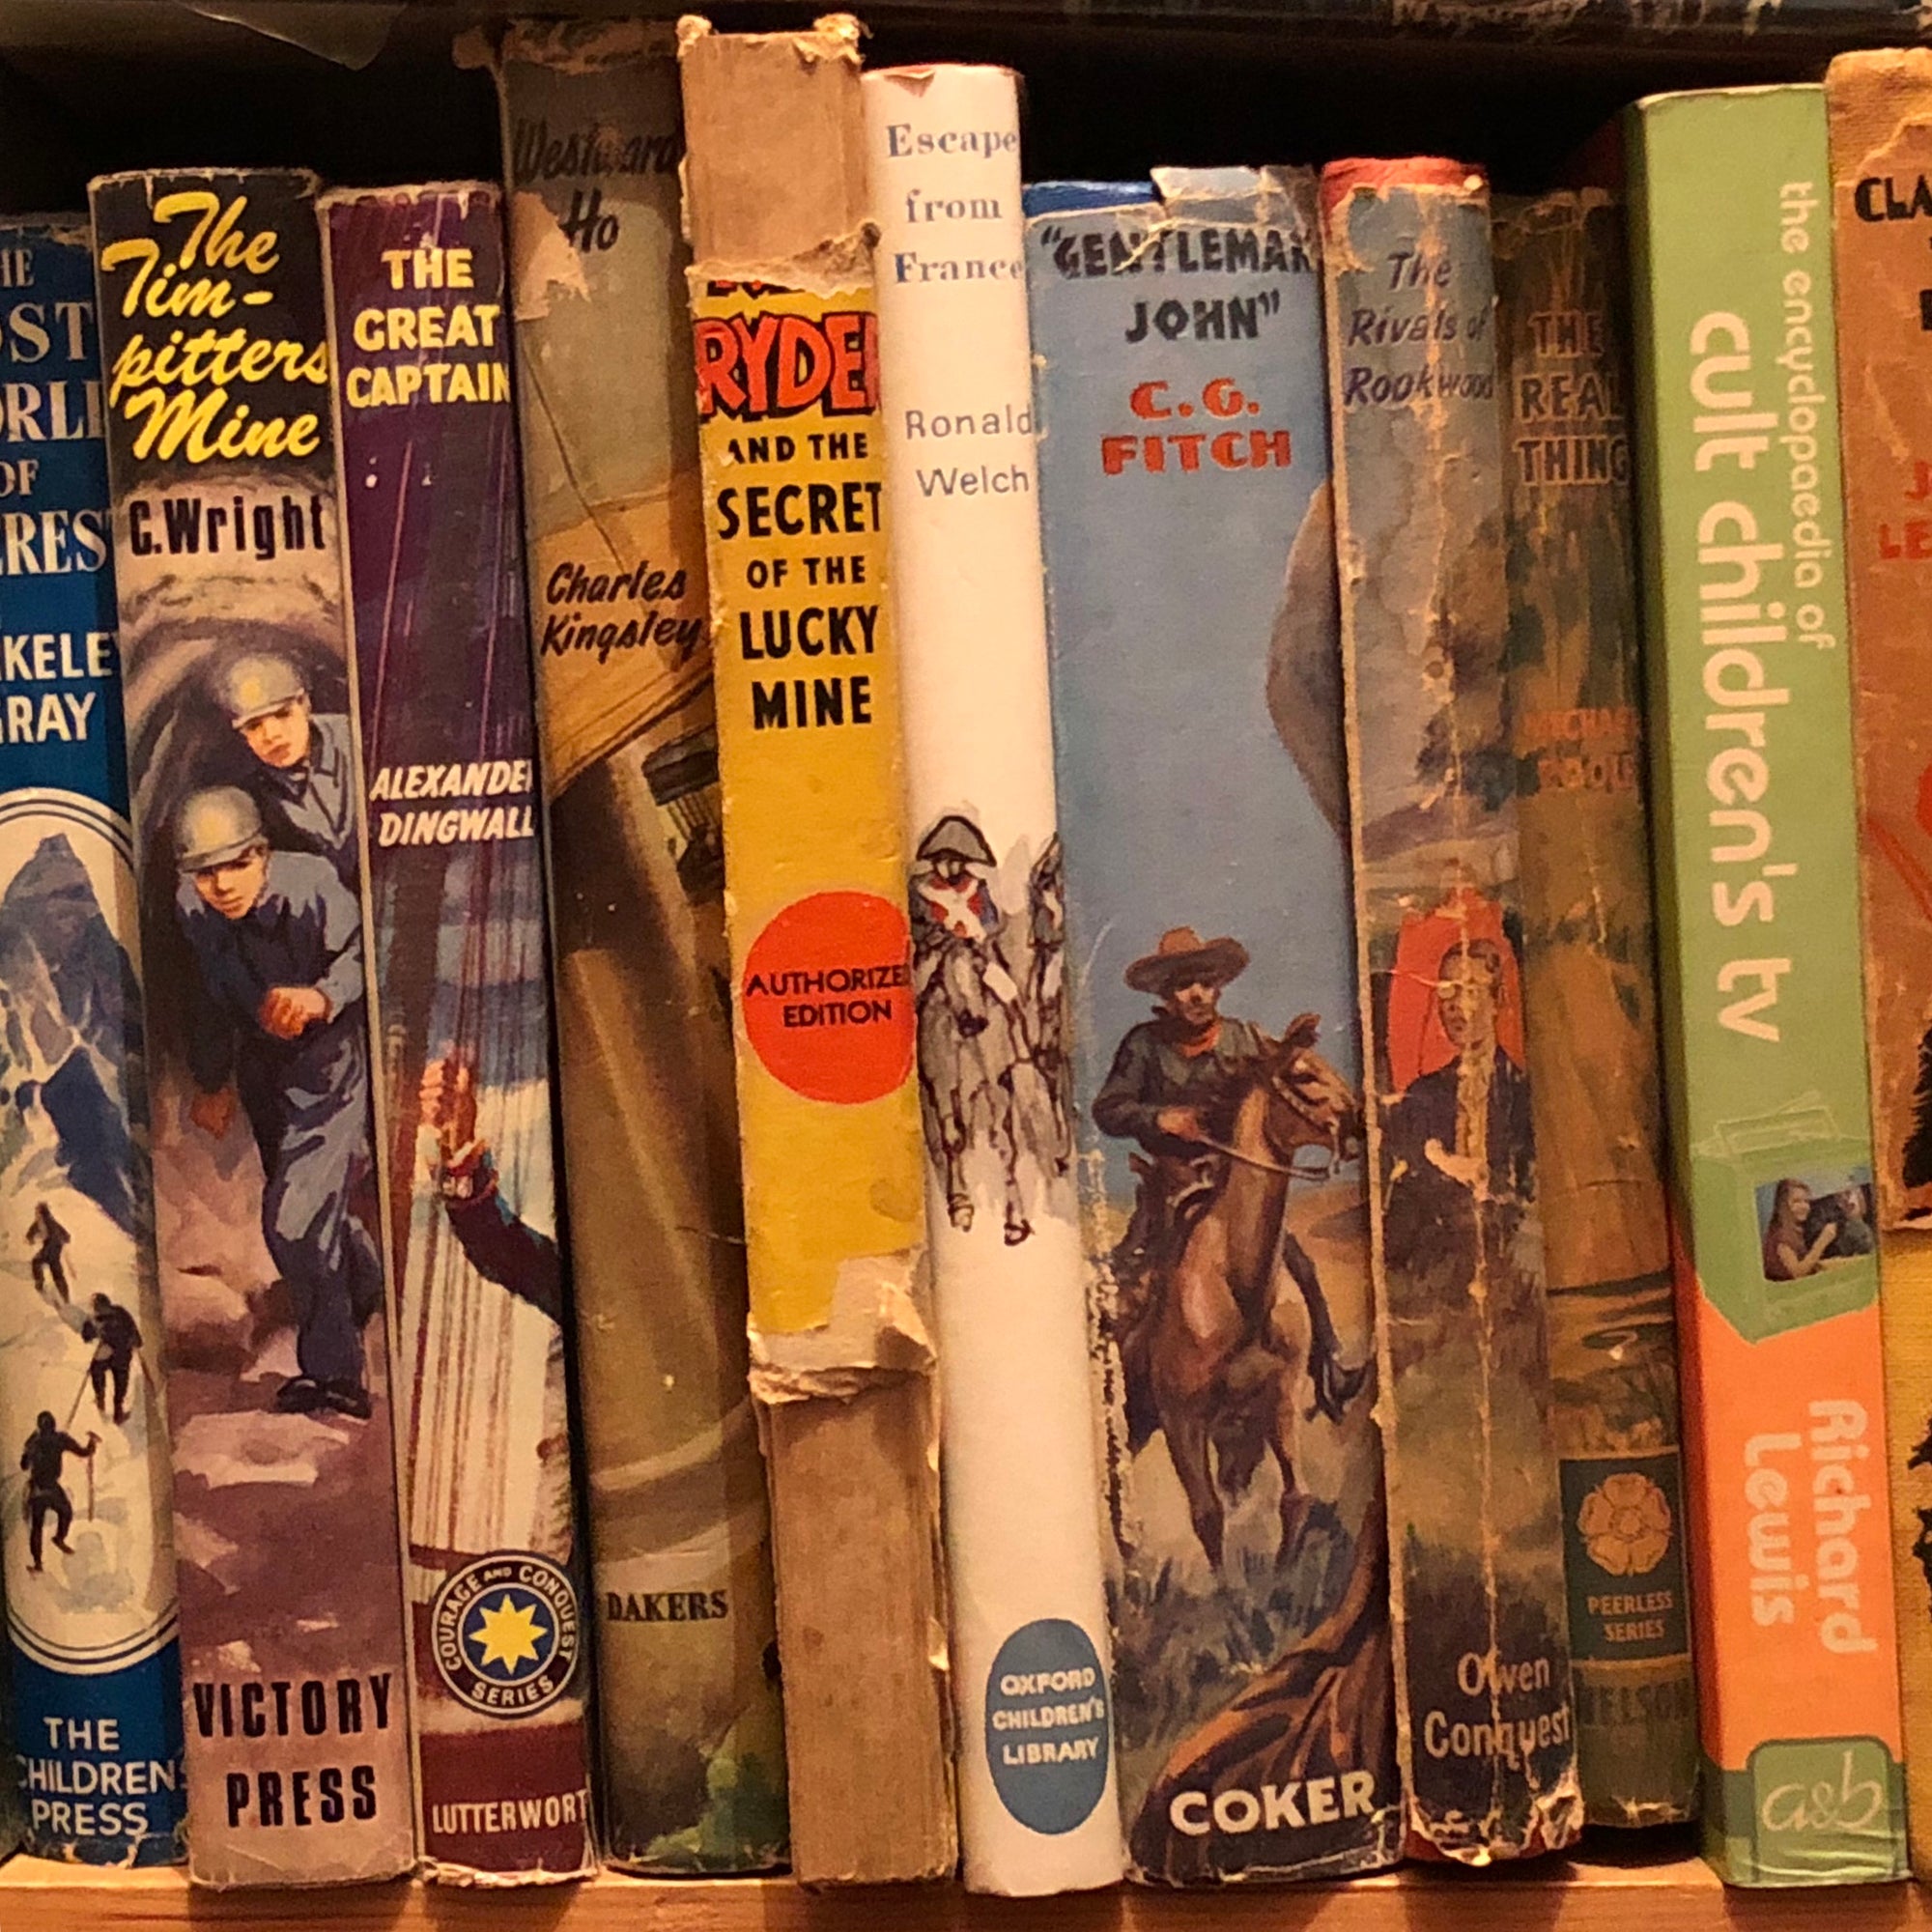 'Authorized Edition' shows the well worn spines of vintage children's books on a shelf, photographed by Richard Heeps in a secondhand bookshop in the British seaside town Sheringham.